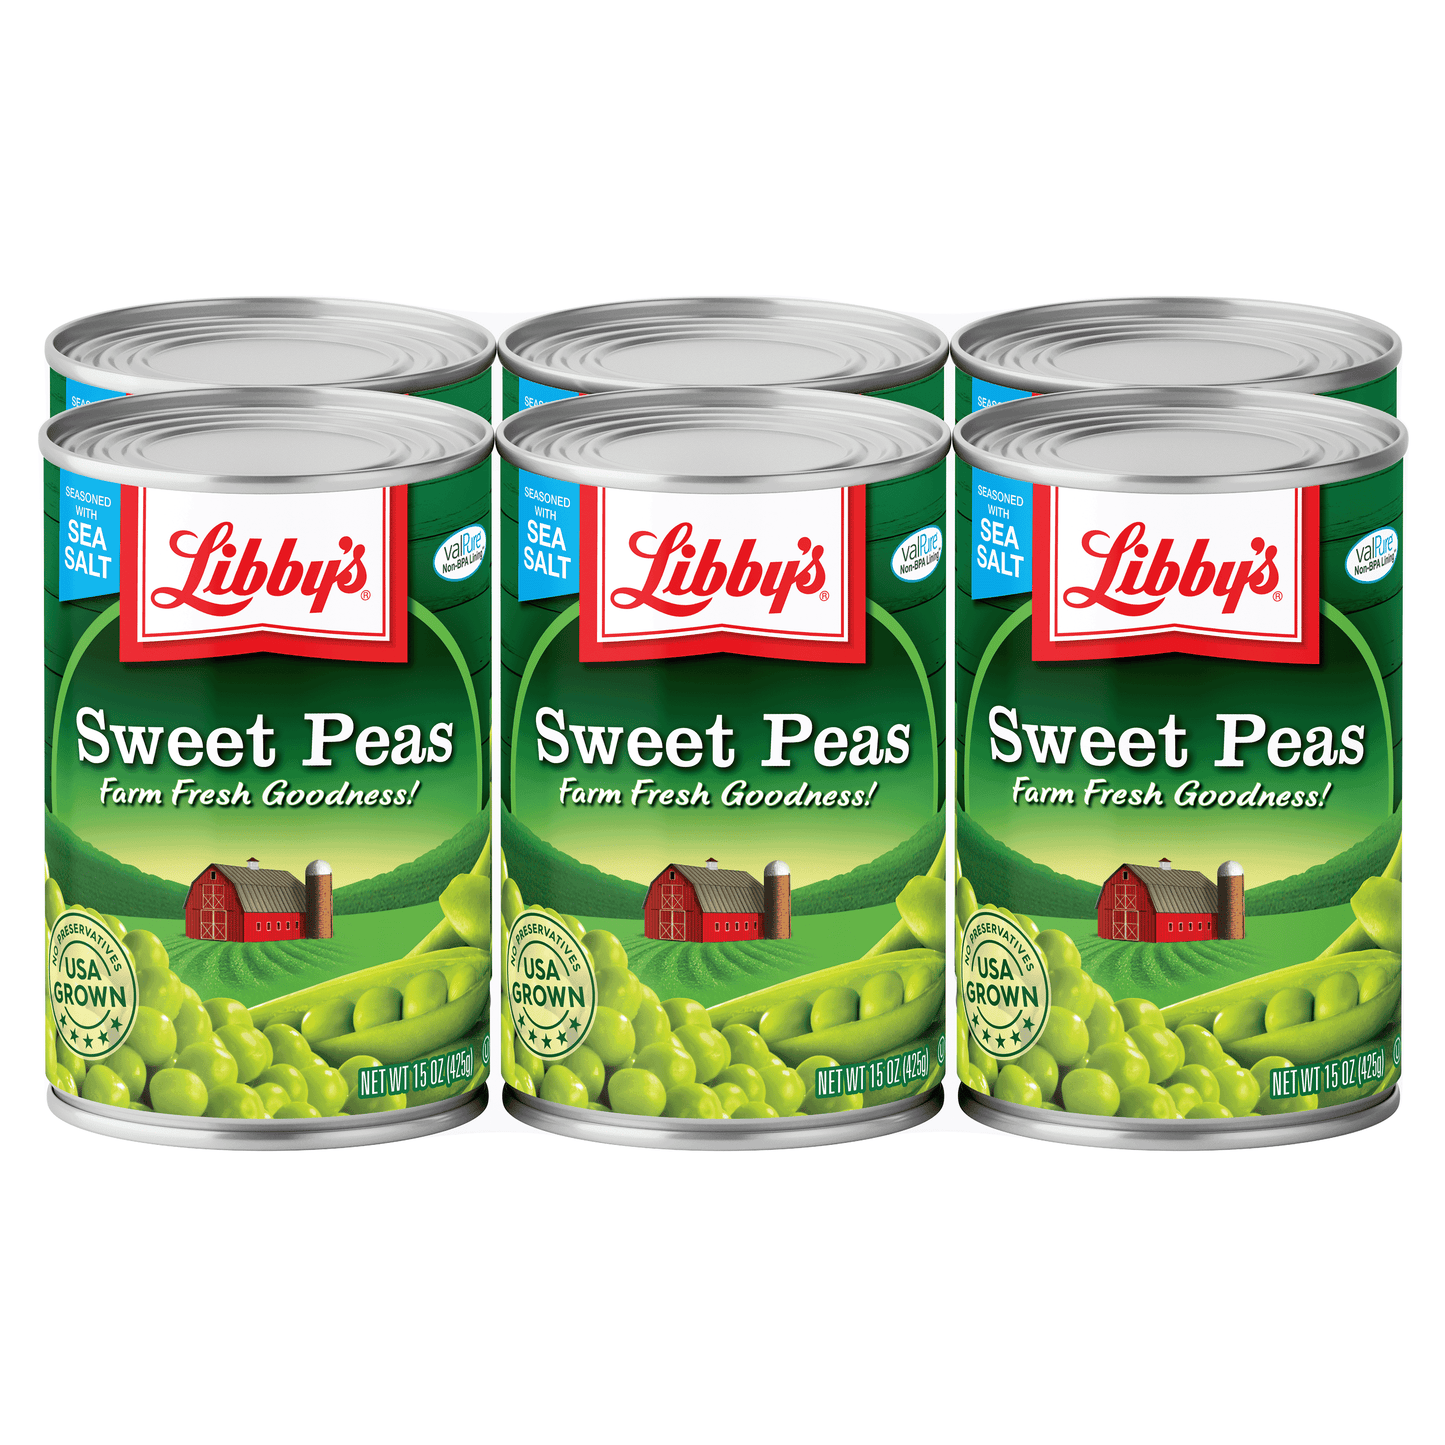 (6 Cans) Libby's Canned Sweet Peas, 15 oz